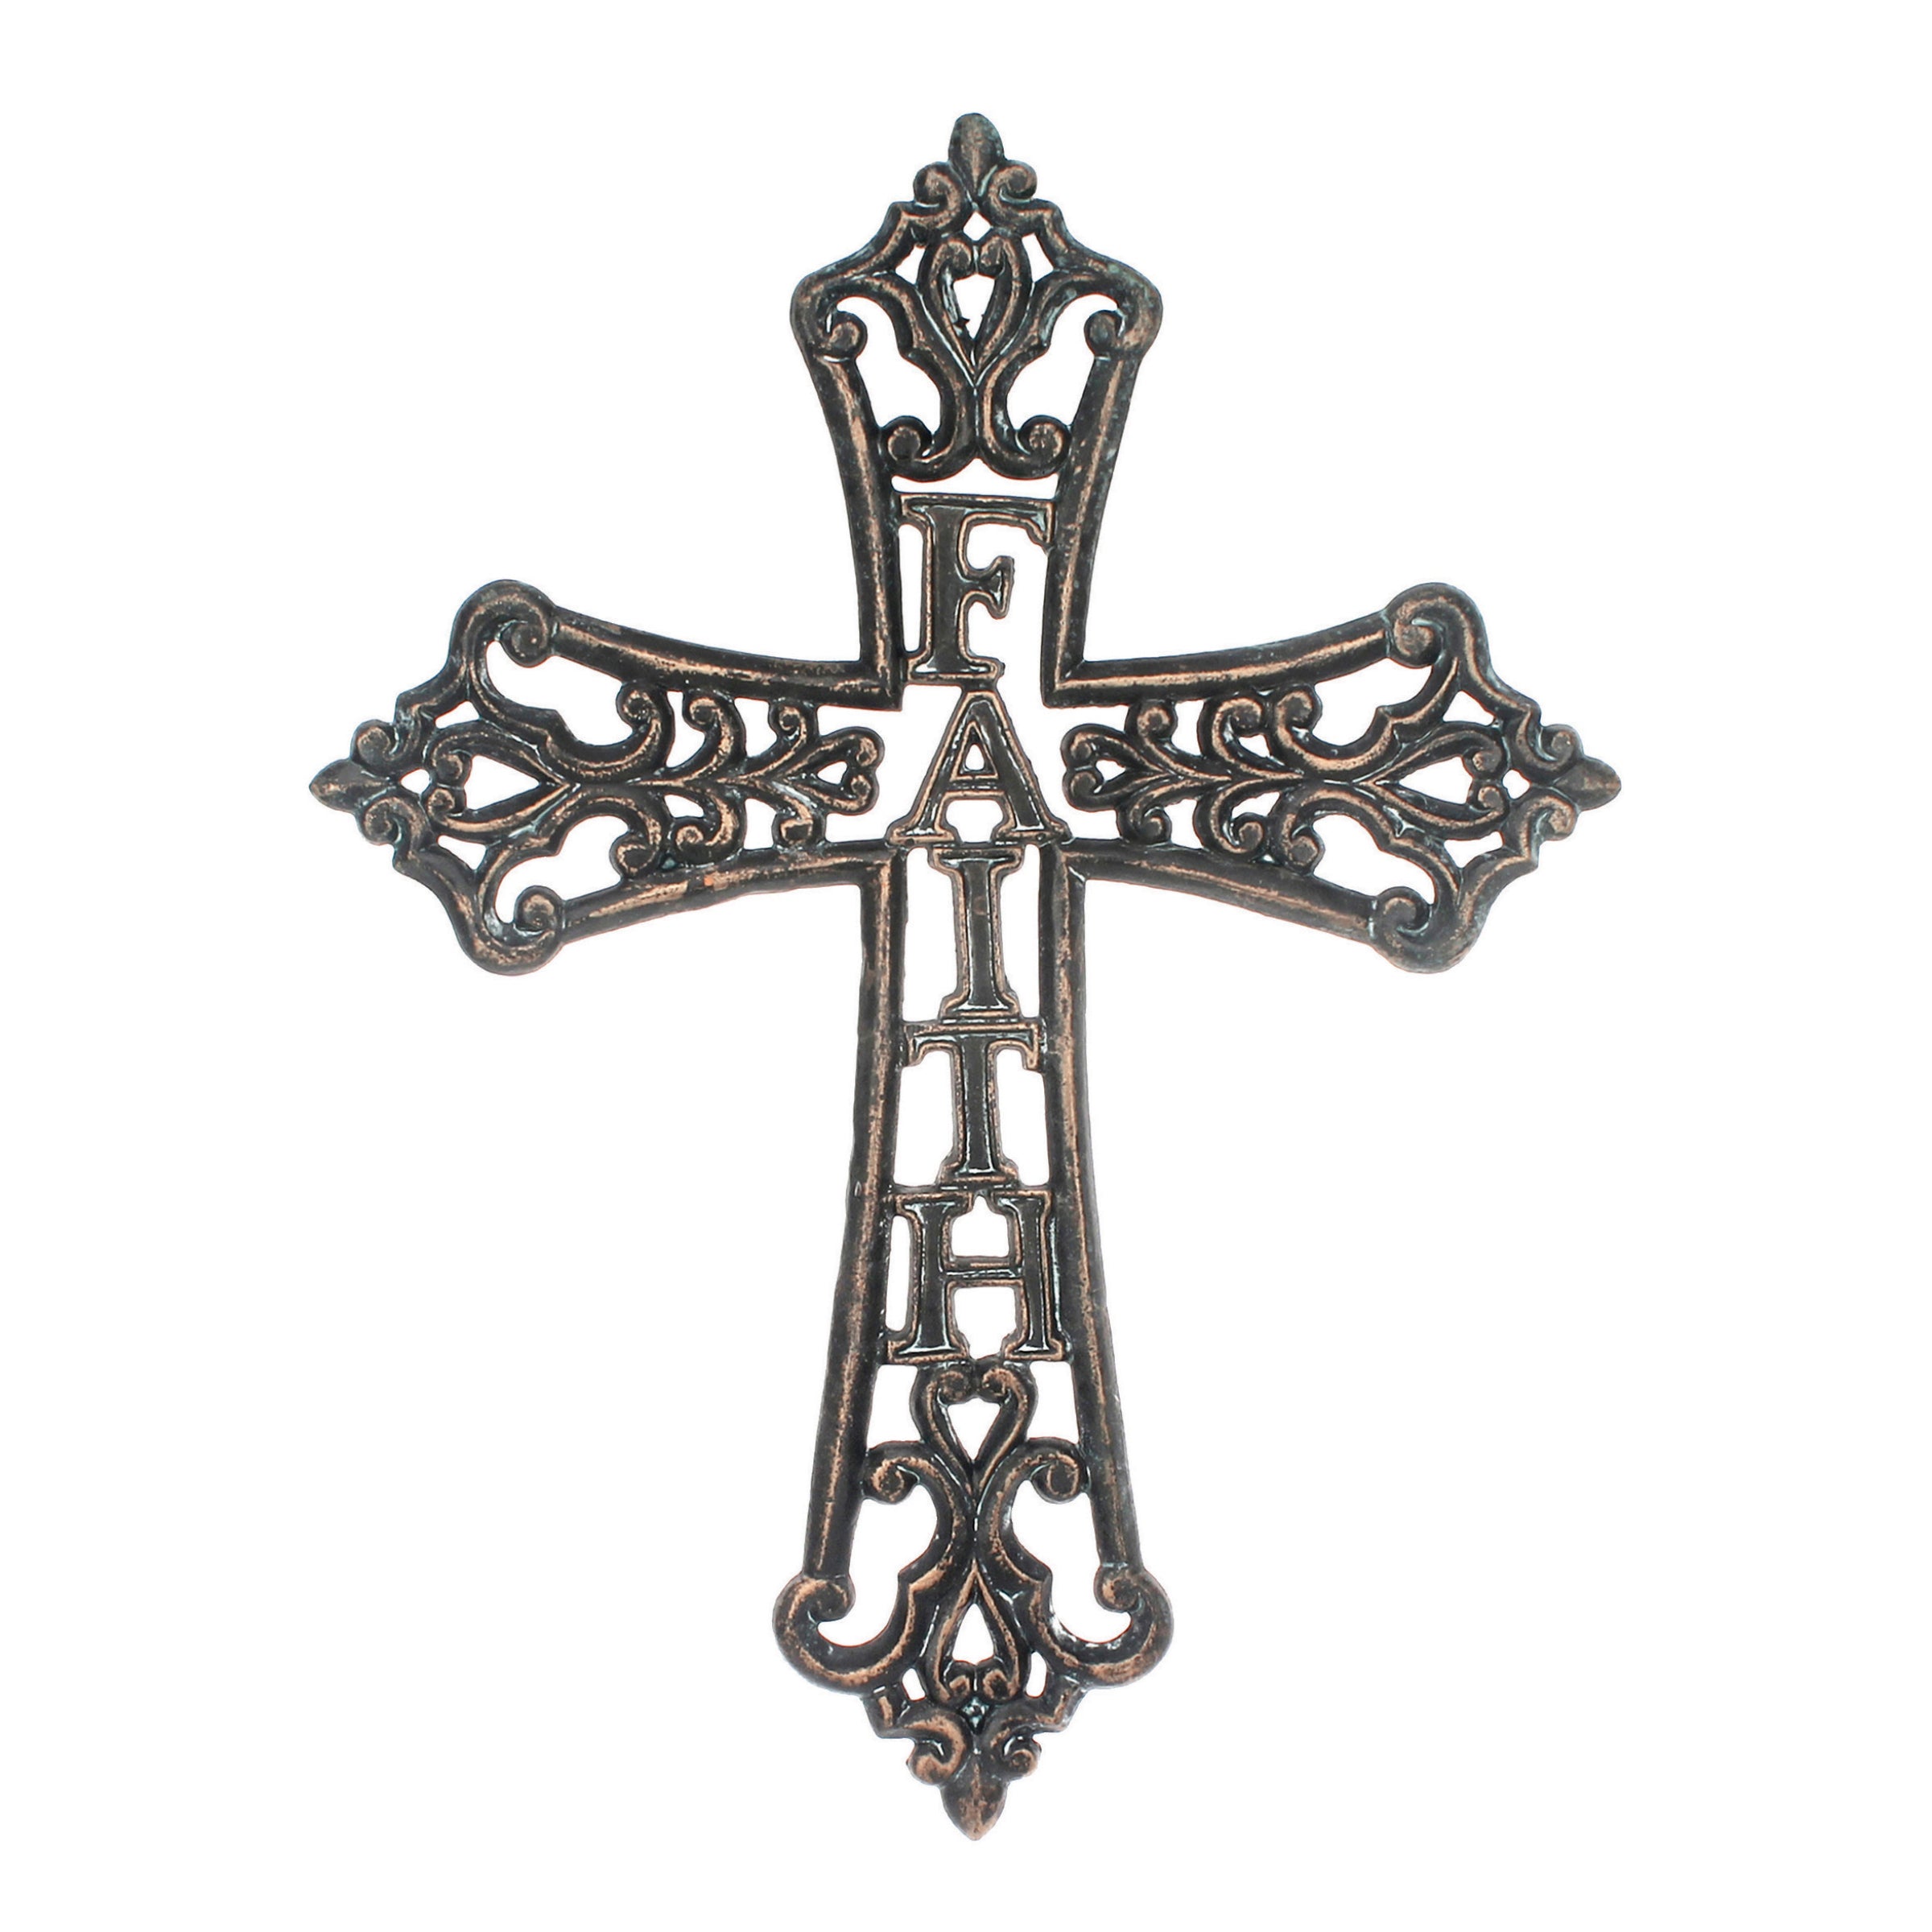 Distressed Cast Iron Faith Hanging Wall Cross Stonebriar Collection